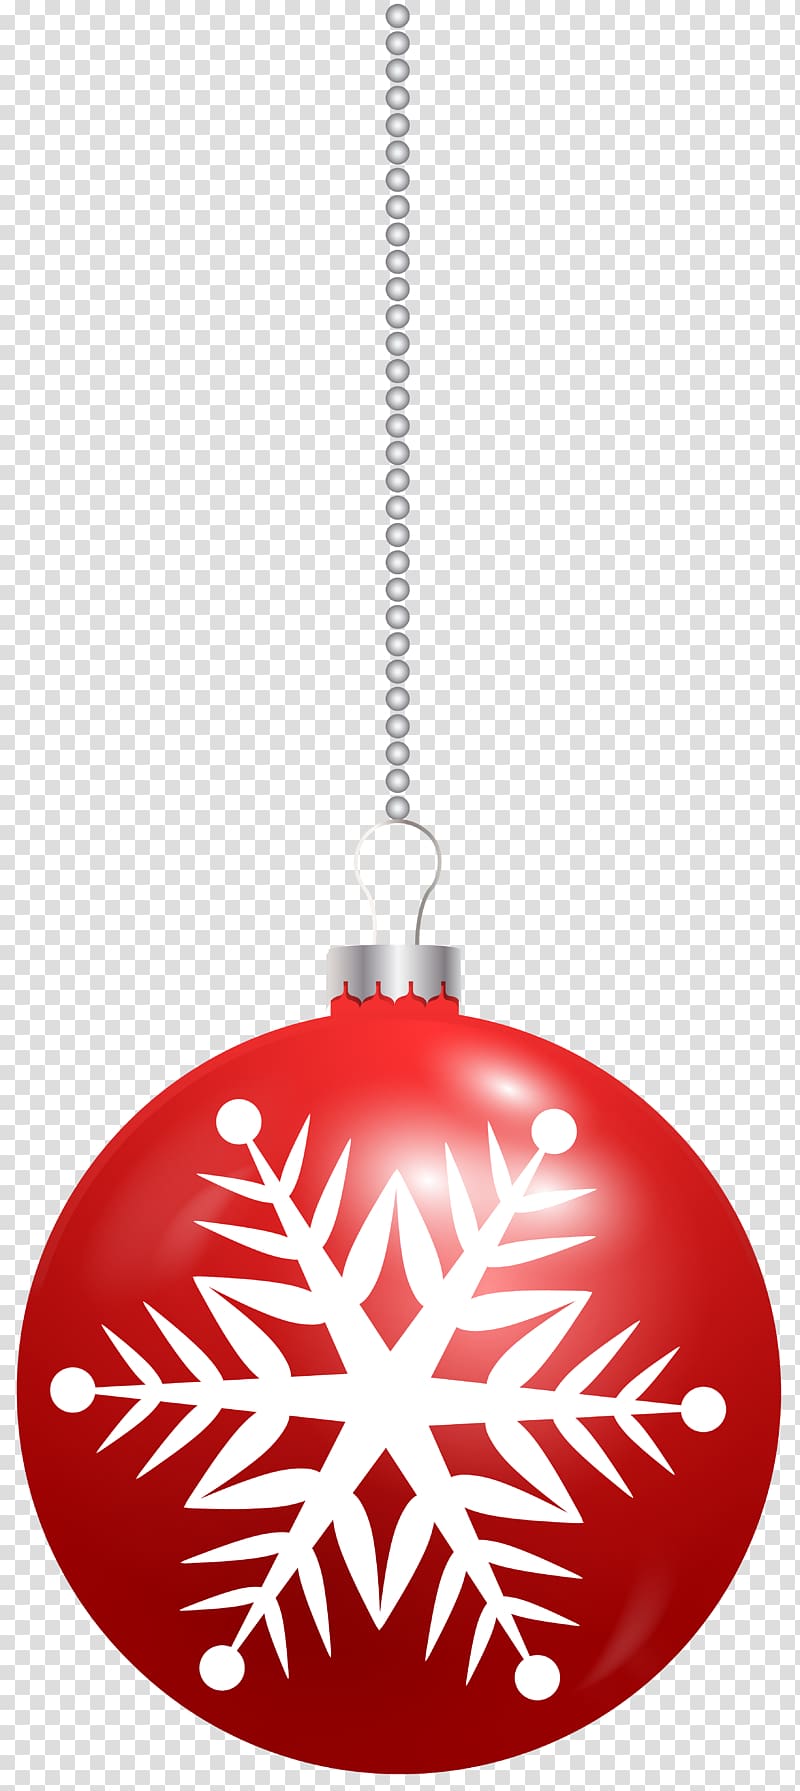 Volvo Trucks Snowflake , Christmas Ball with Snowflake transparent background PNG clipart